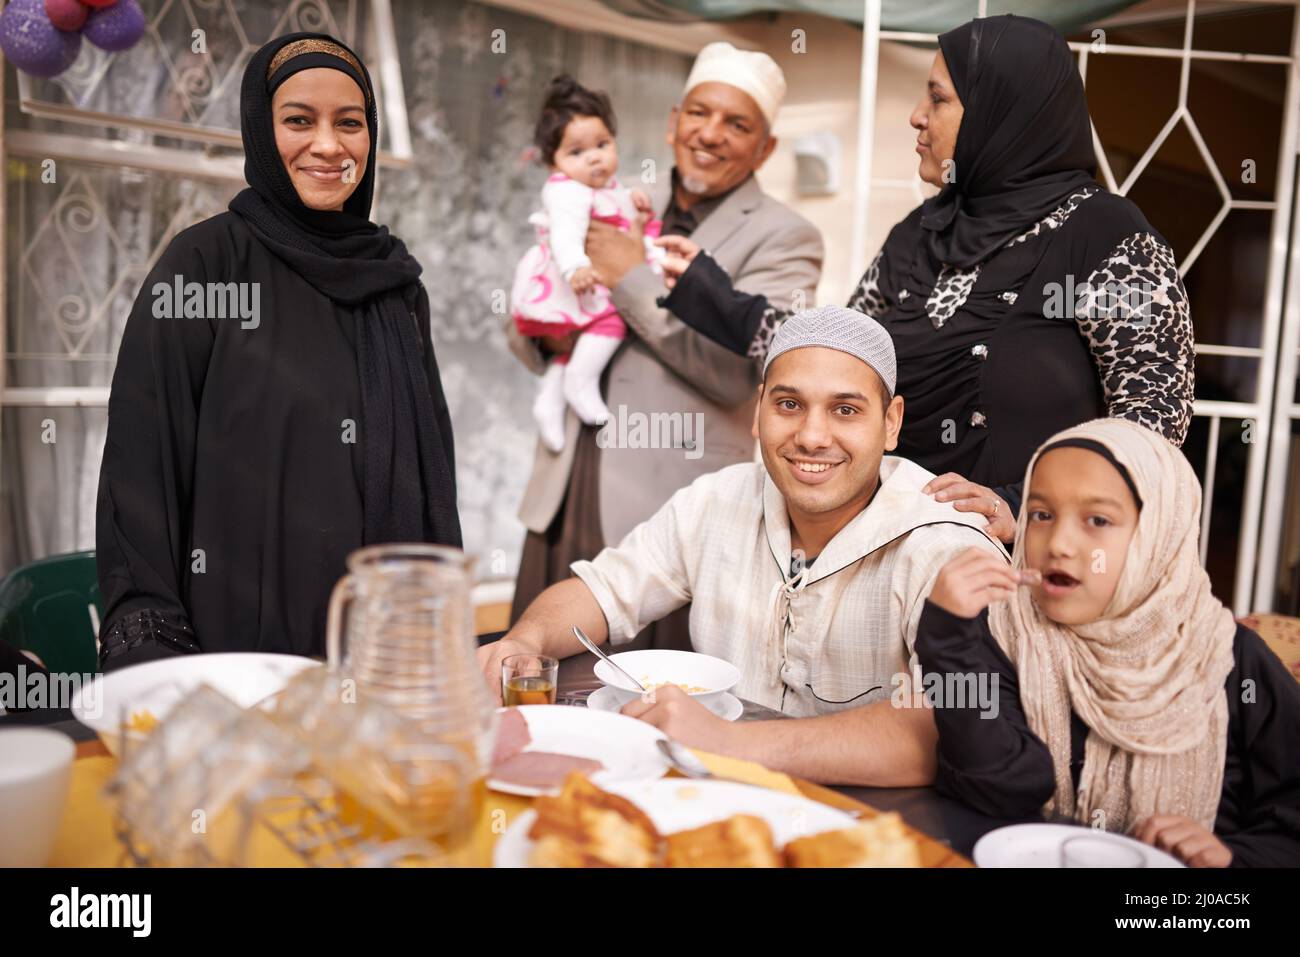 The end of the fast. Shot of a muslim family eating together. Stock Photo